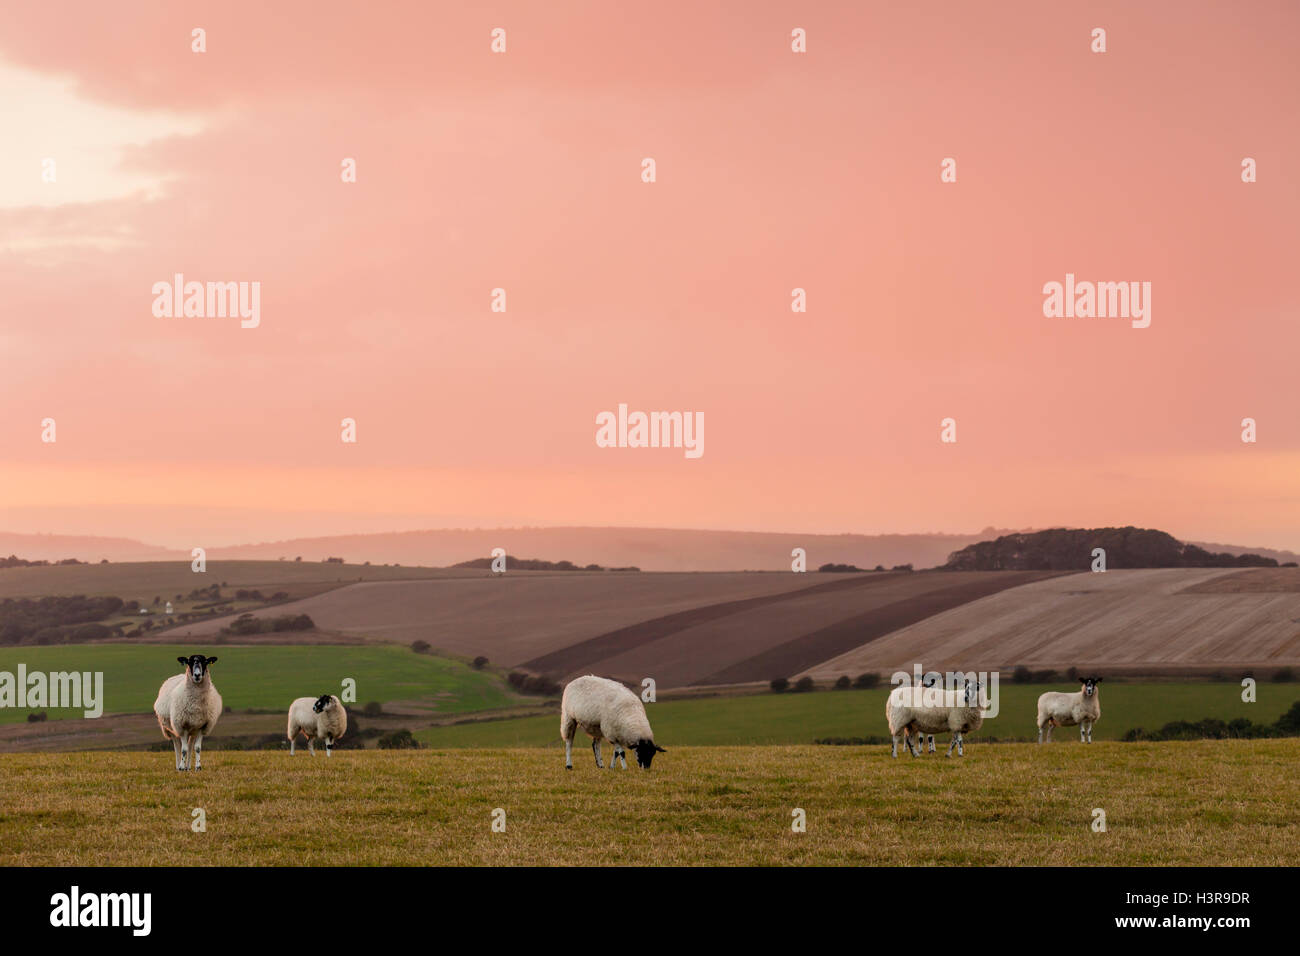 Stürmische Sonnenuntergang in South Downs National Park, East Sussex, England. Stockfoto